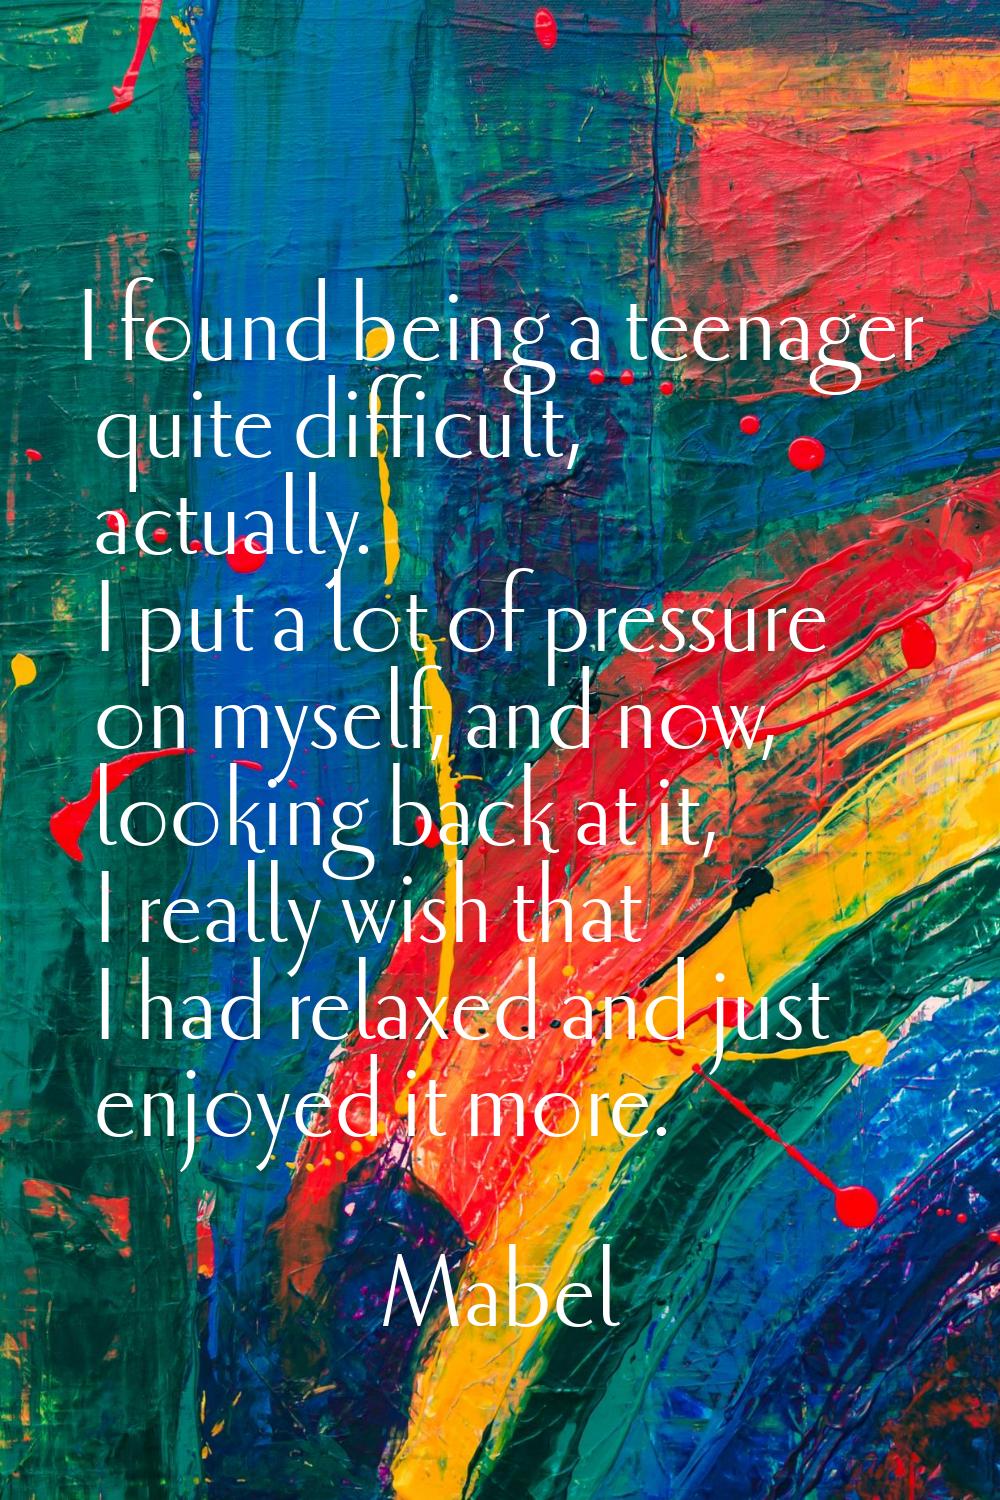 I found being a teenager quite difficult, actually. I put a lot of pressure on myself, and now, loo